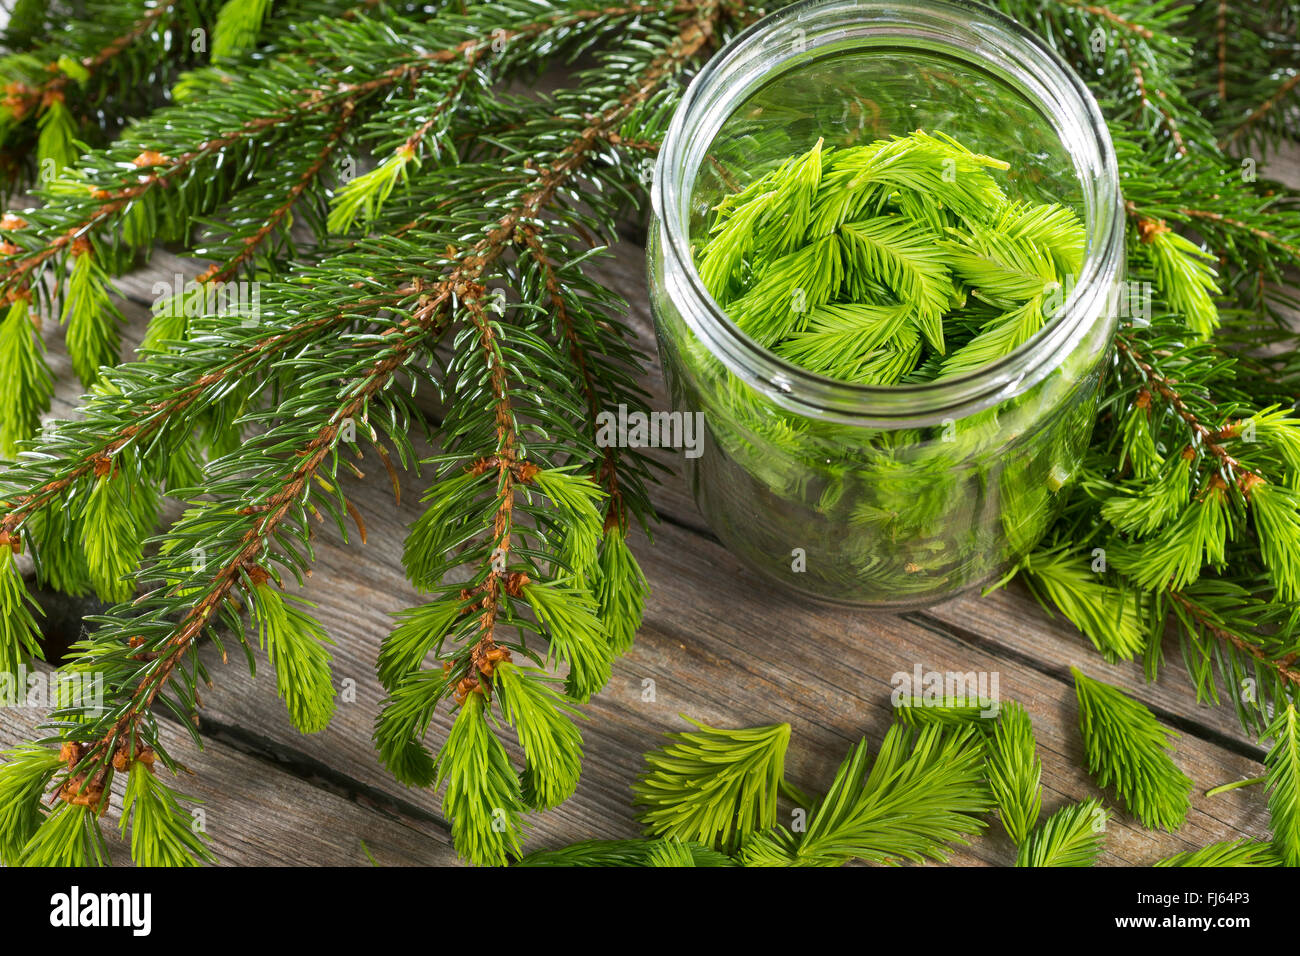 Norway spruce (Picea abies), young sproots in a preserving jar, Germany Stock Photo